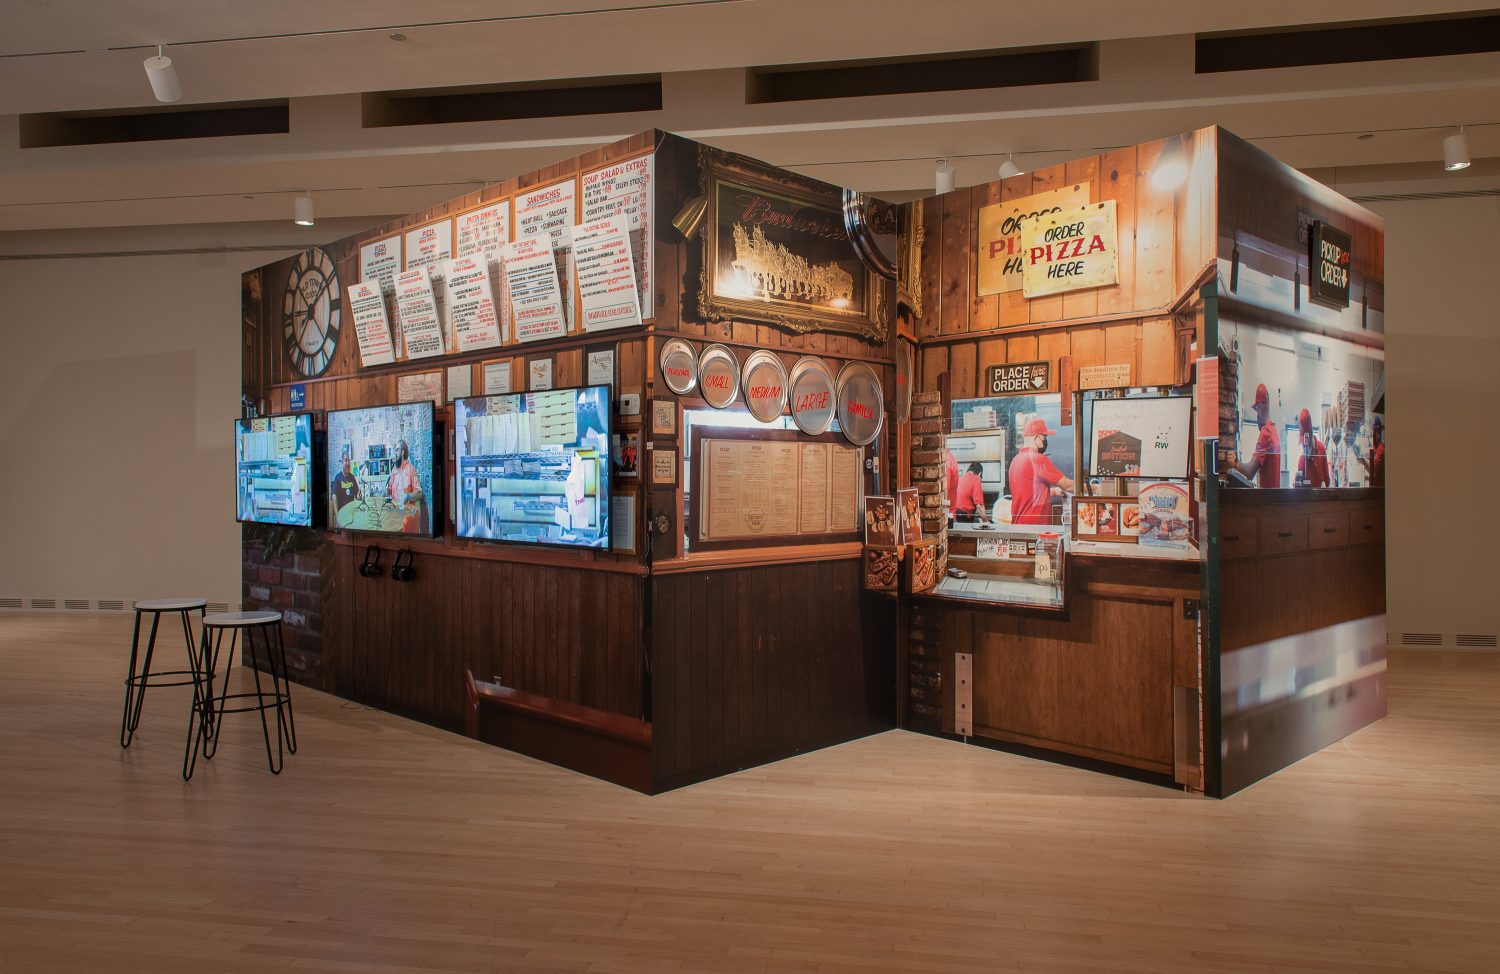 Mario Ybarra Jr., “Personal, Small, Medium, Large, Family,” 2021, custom stage facade with videos, photographic wallpaper, framed photographs, 3 aluminum pizza pans, hand-painted canvas signs, wood. On view in “Undoing Time: Art and Histories of Incarcera